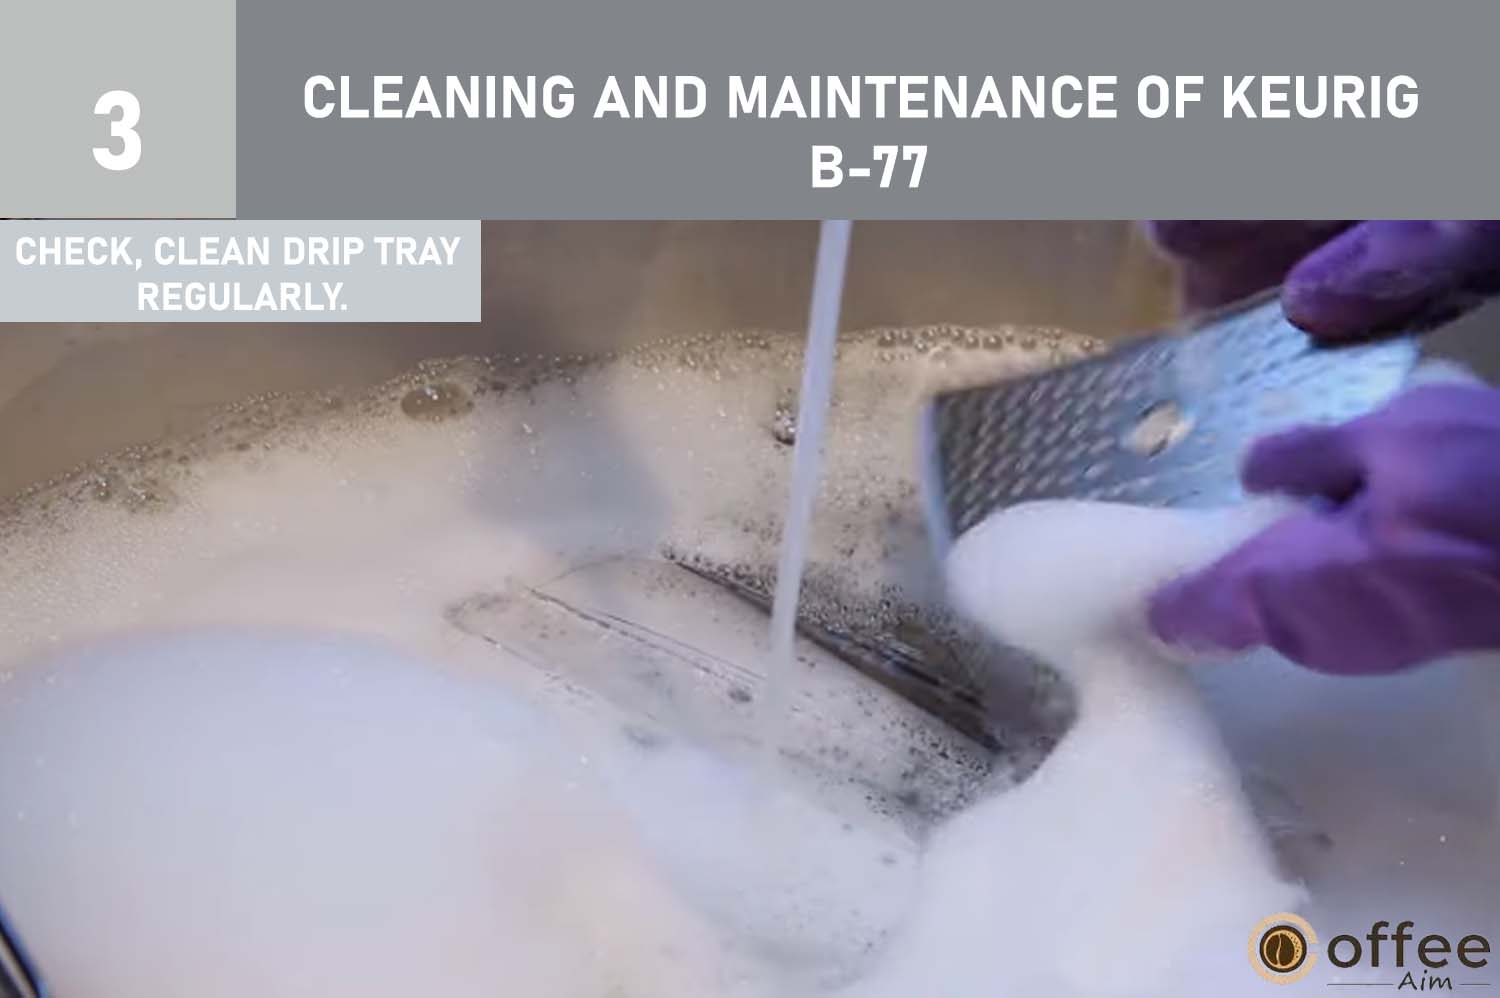 Regularly check and clean the Drip Tray and Drip Tray Plate as they can accumulate up to 12 ounces of overflow to maintain cleanliness and functionality.